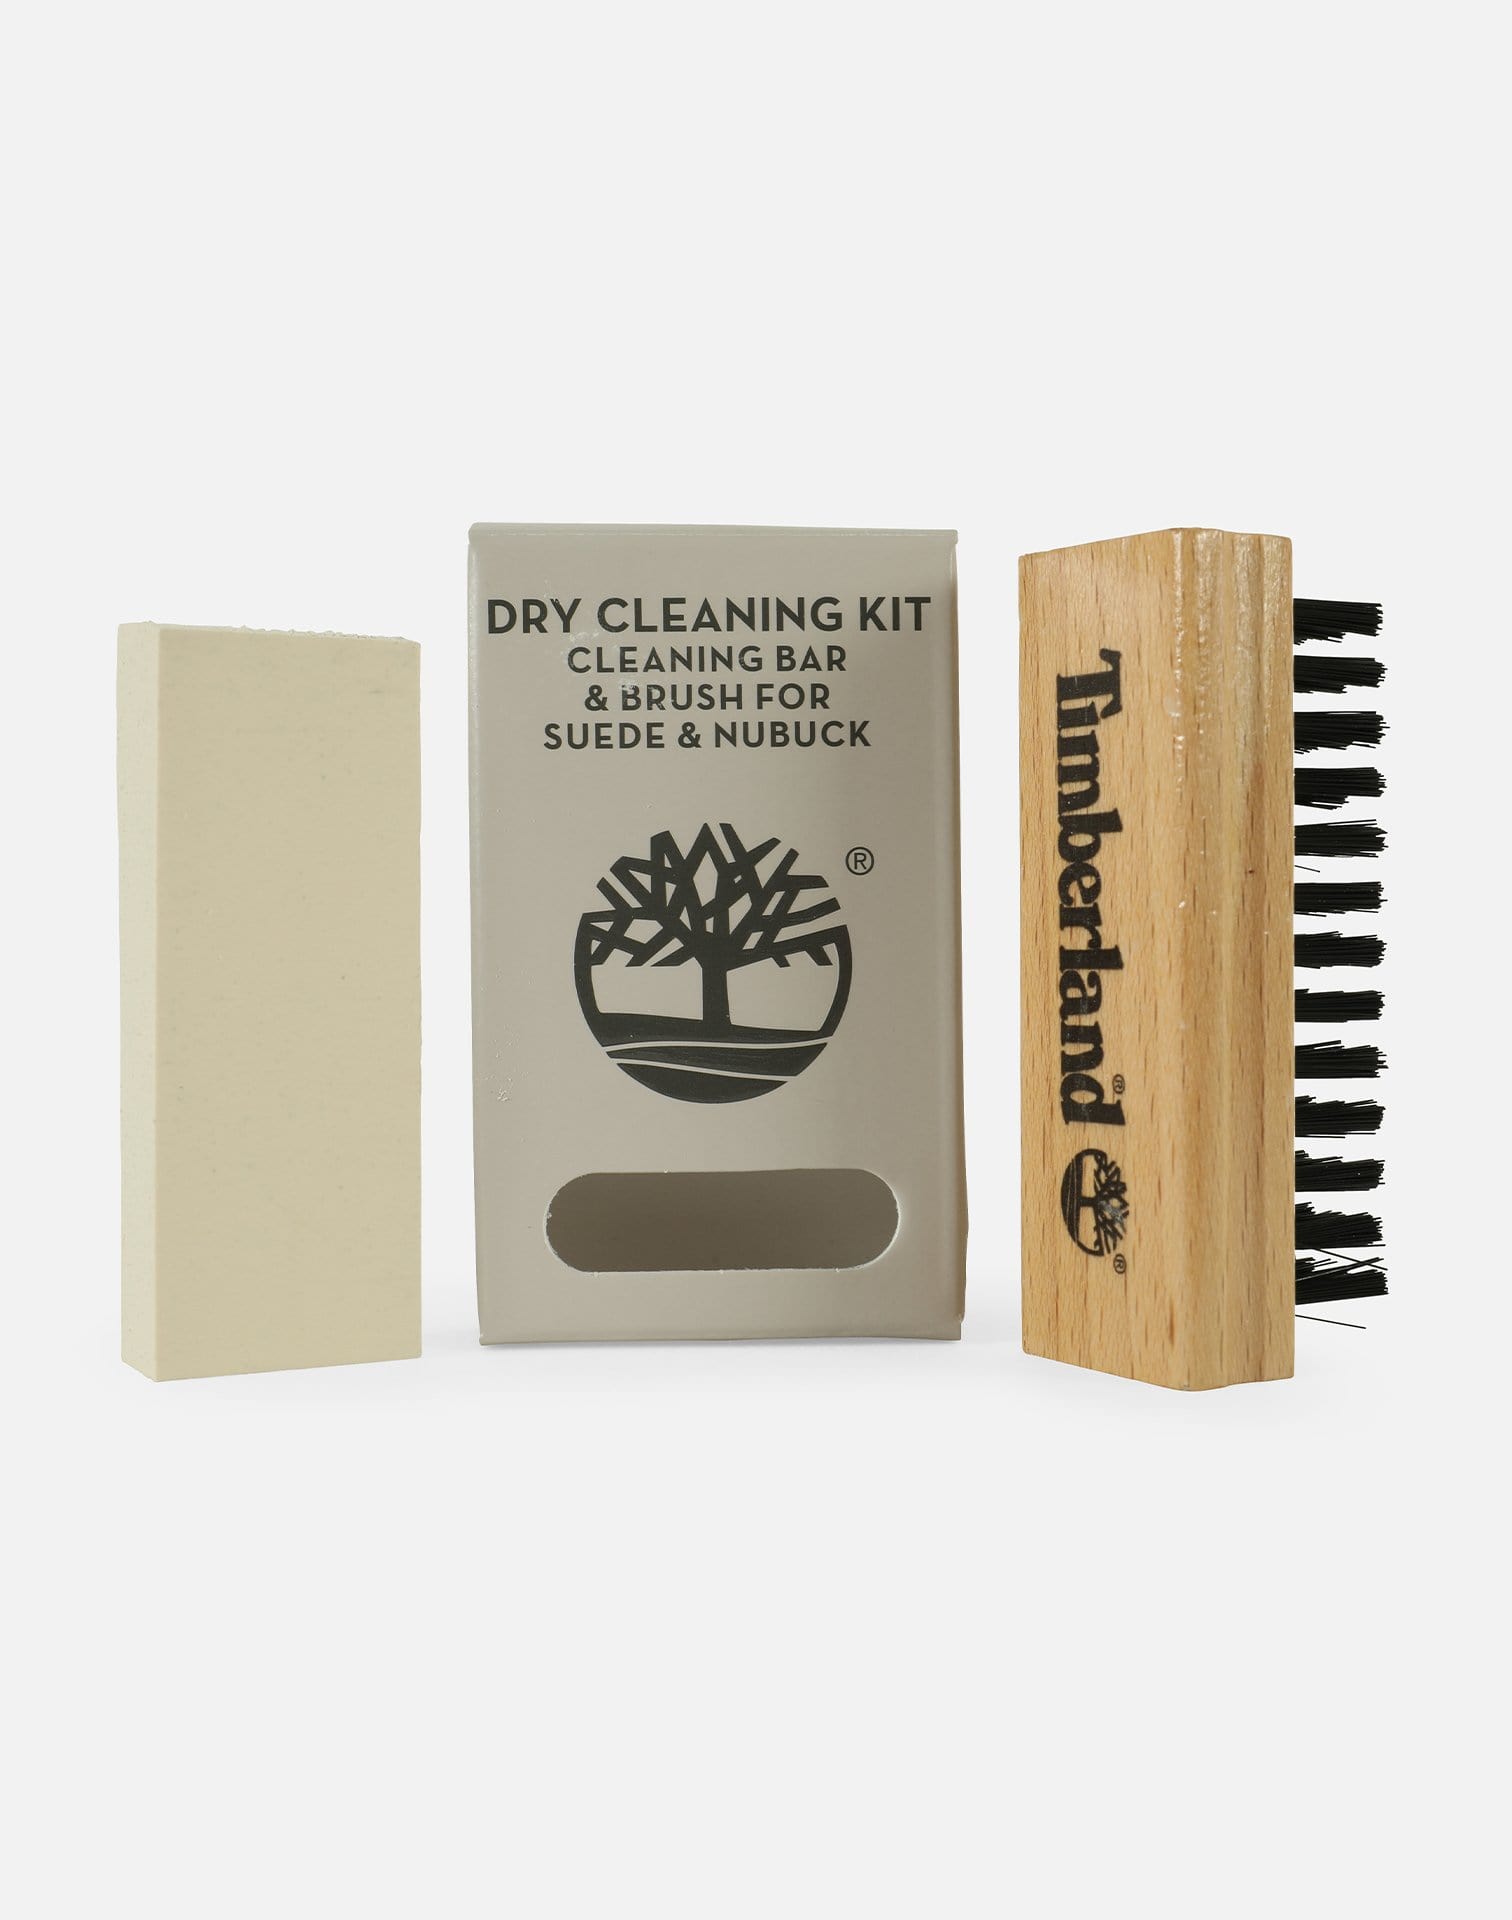 Dry Cleaning Kit for Suede, Nubuck & Canvas